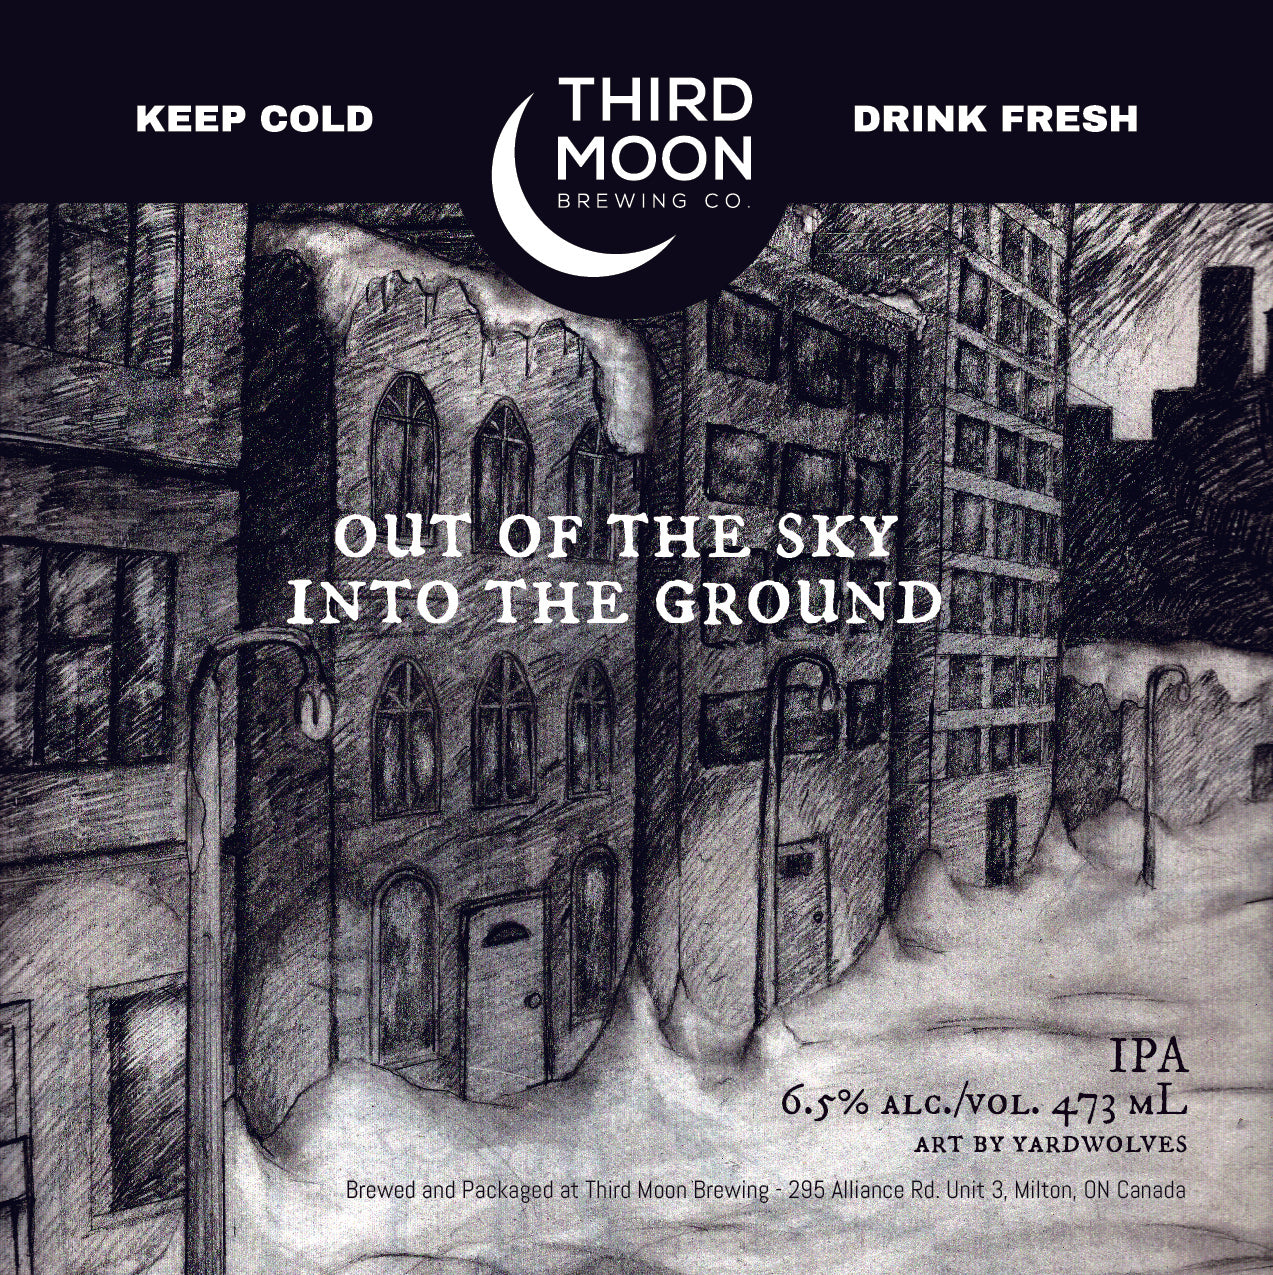 IPA - 4-pk of "Out Of The Sky Into The Ground" tall cans